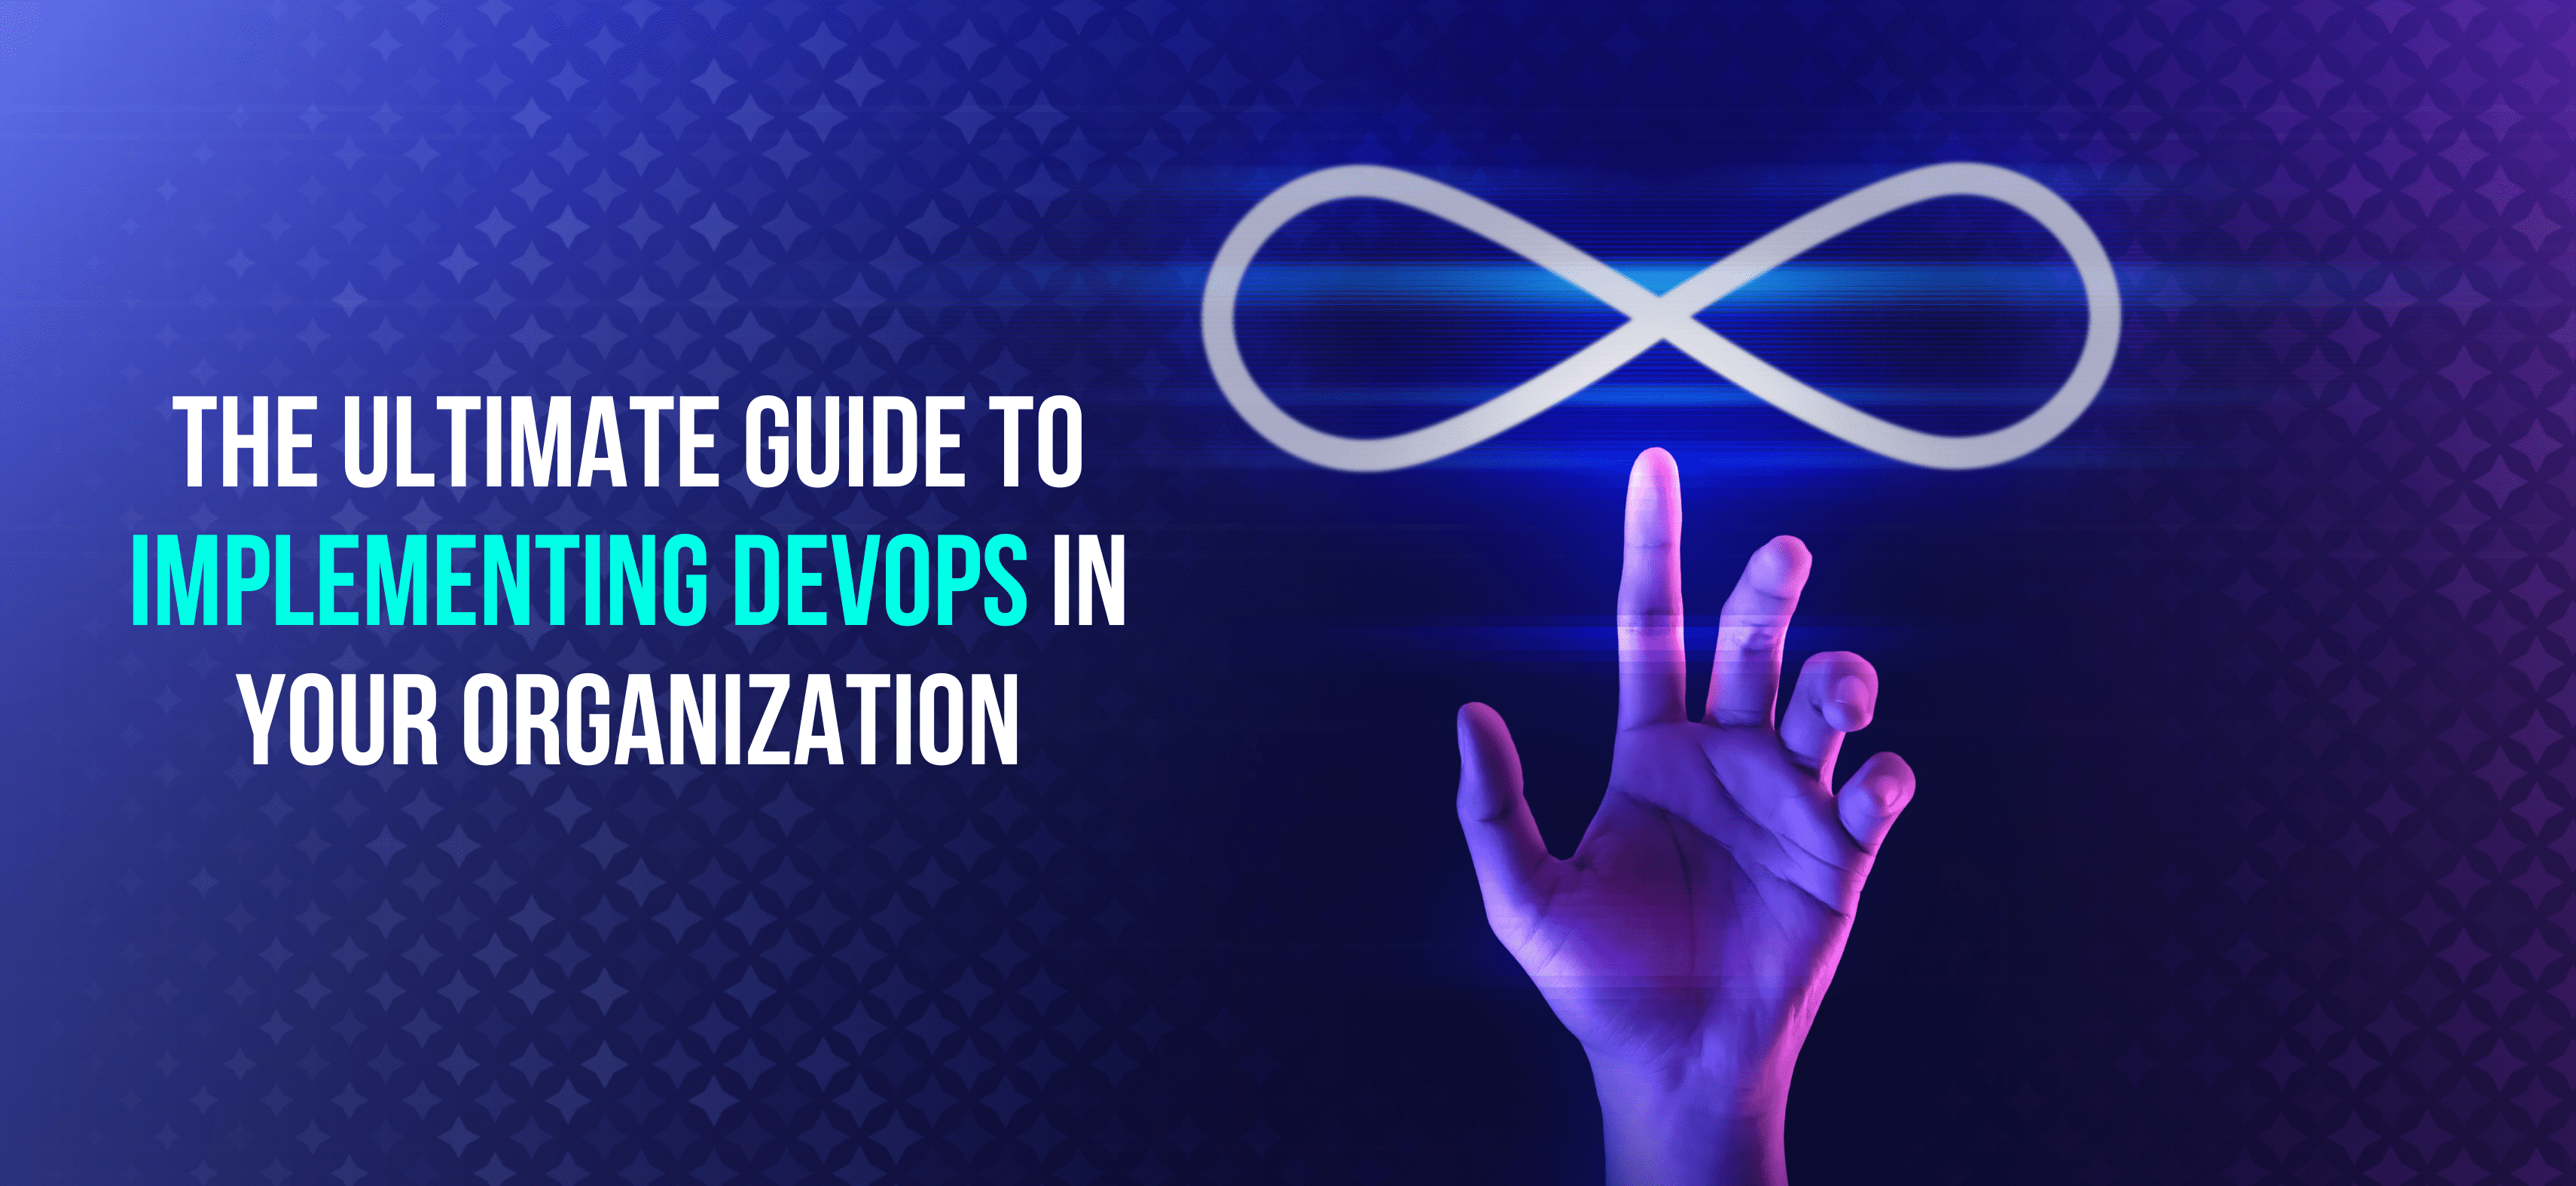 The Ultimate Guide to Implementing DevOps in Your Organization - Internet Soft